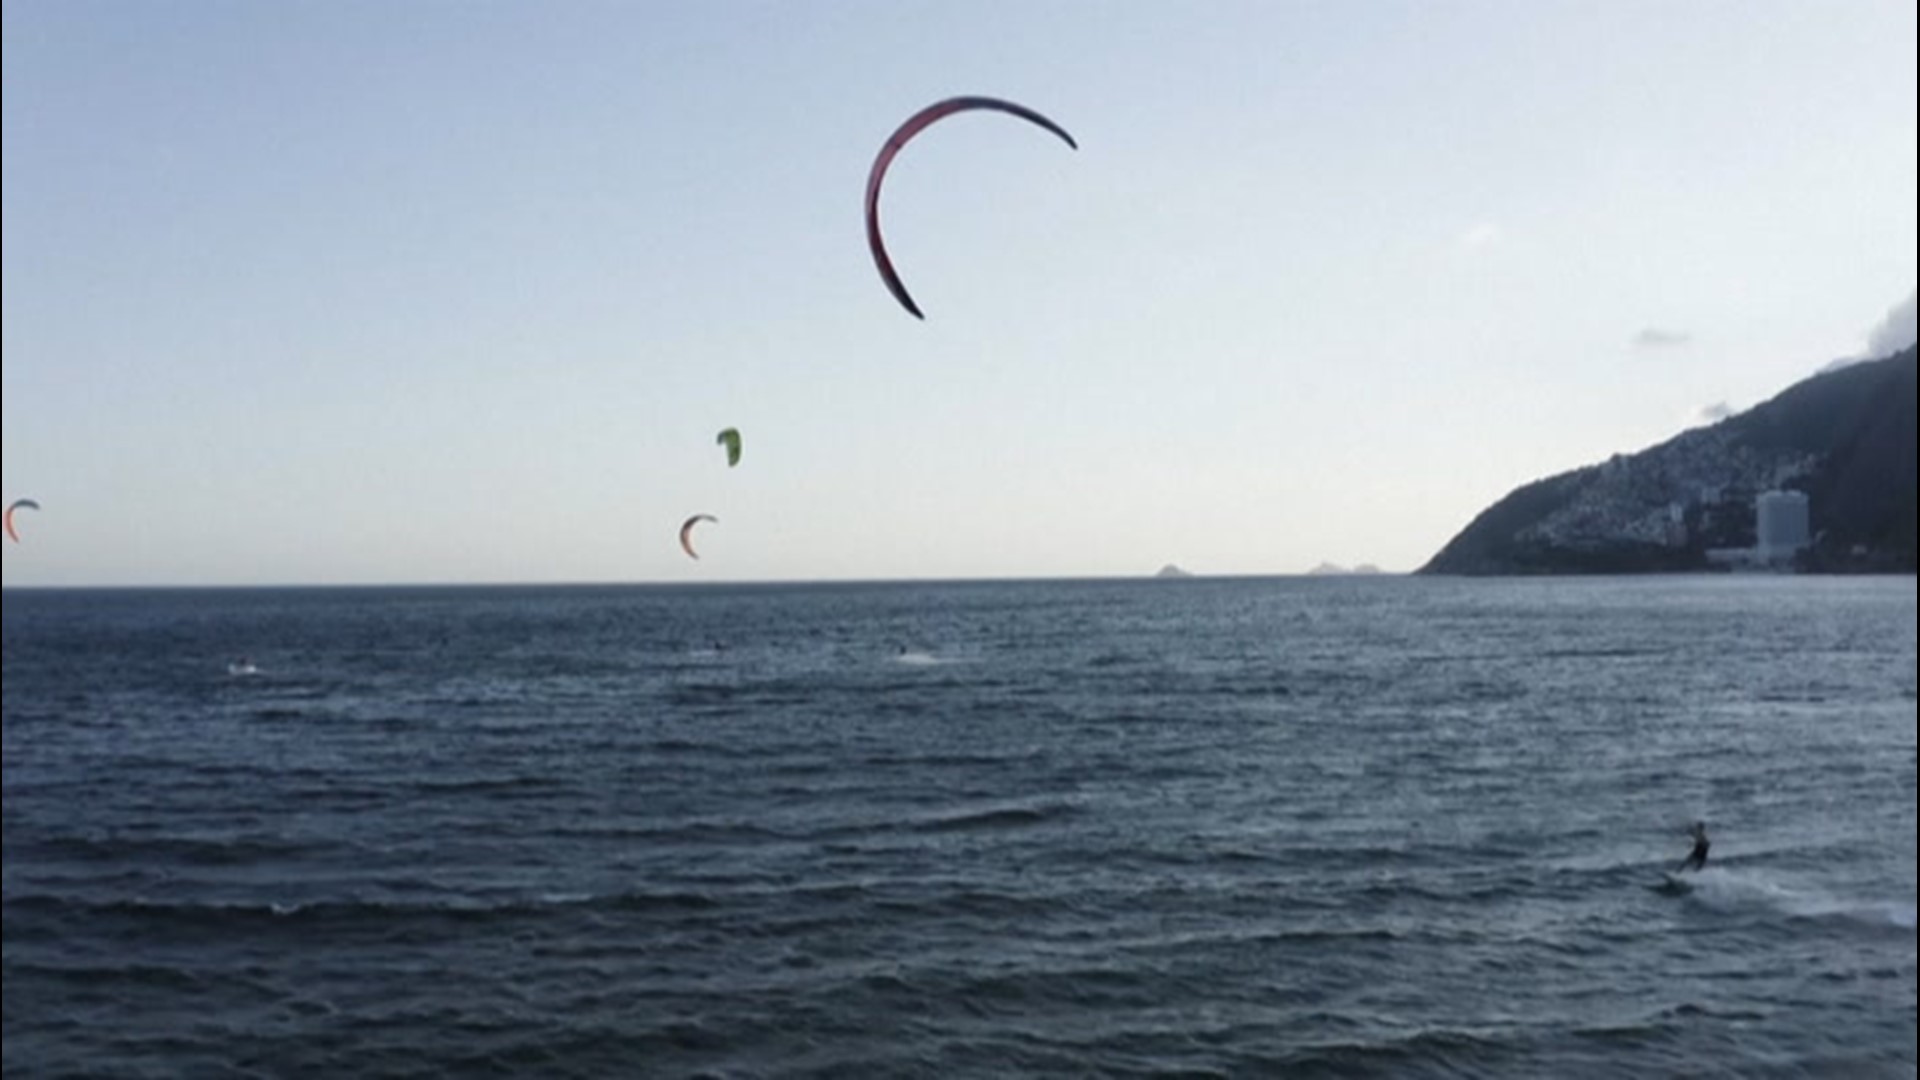 Kite surfers in Rio de Janeiro, Brazil, were treated to rare wind conditions on April 12, which were ideal for kite surfing on Ipanema Beach.